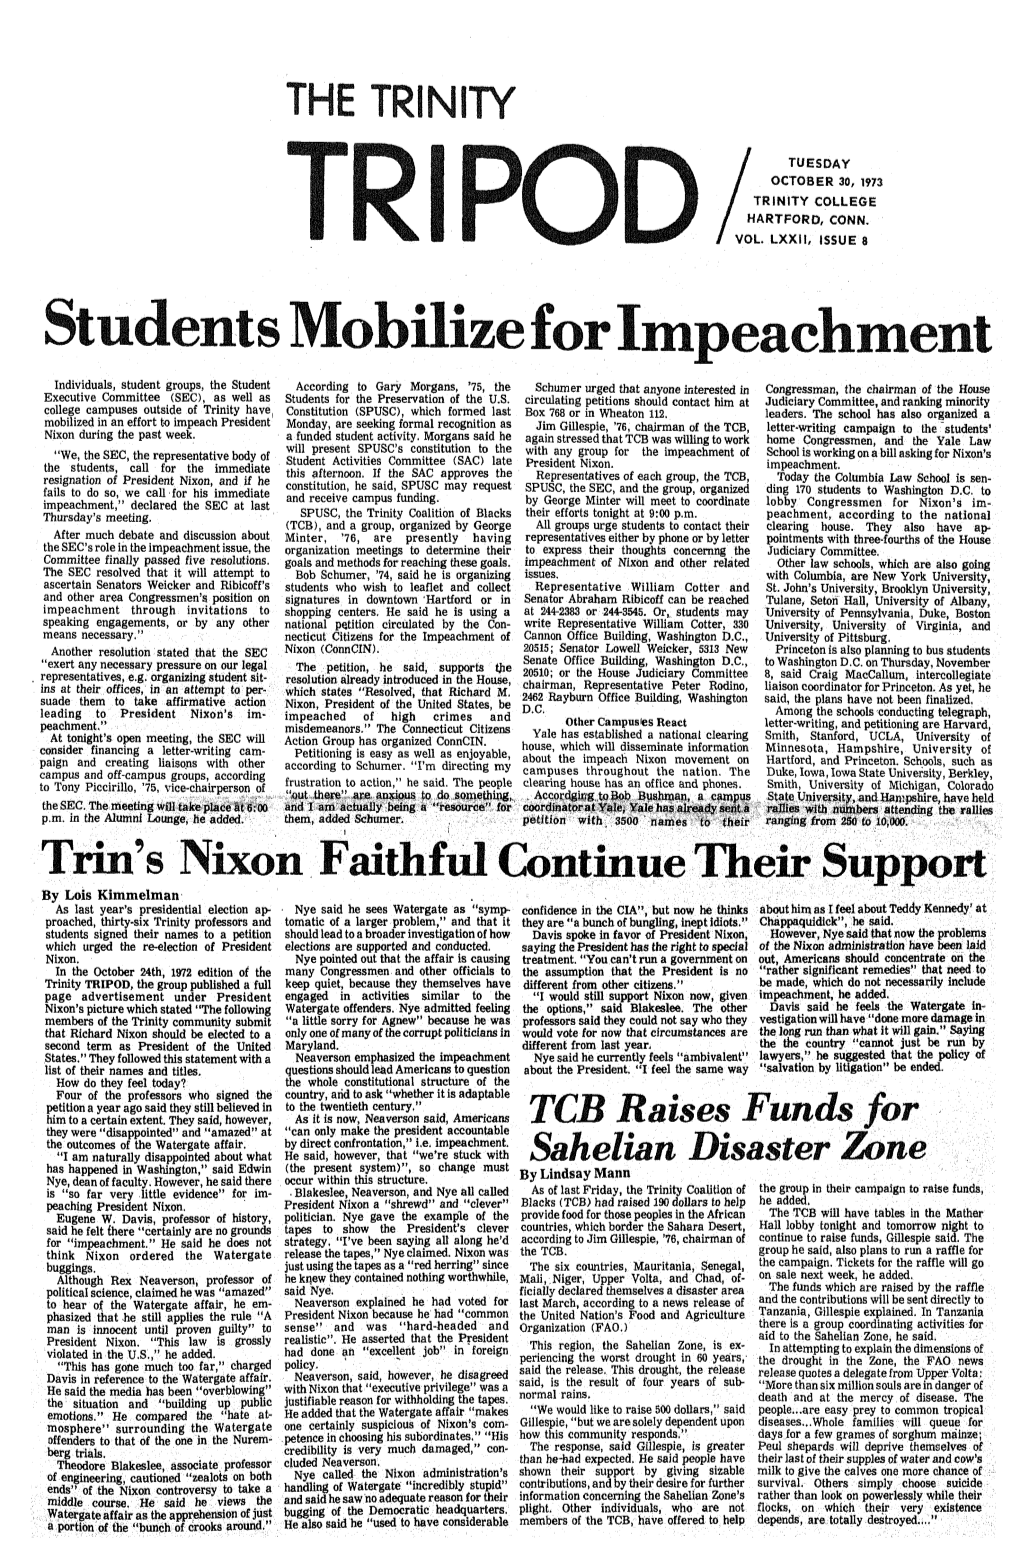 Students Mobilize for Impeachment